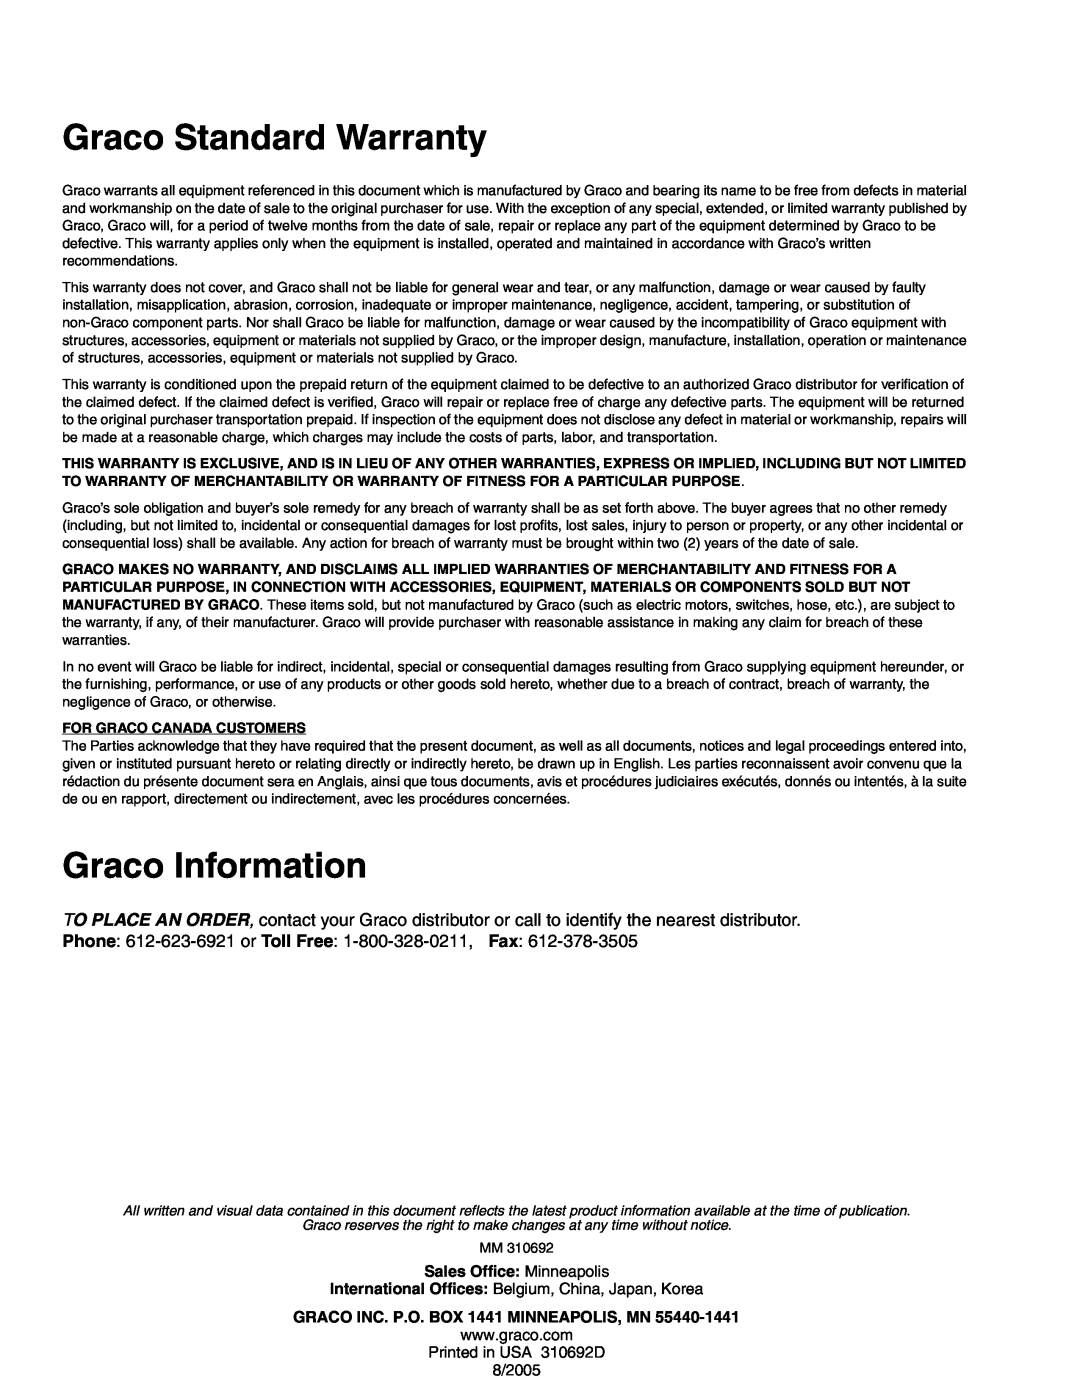 Graco 310692D important safety instructions Graco Standard Warranty, Graco Information, Sales Office Minneapolis 